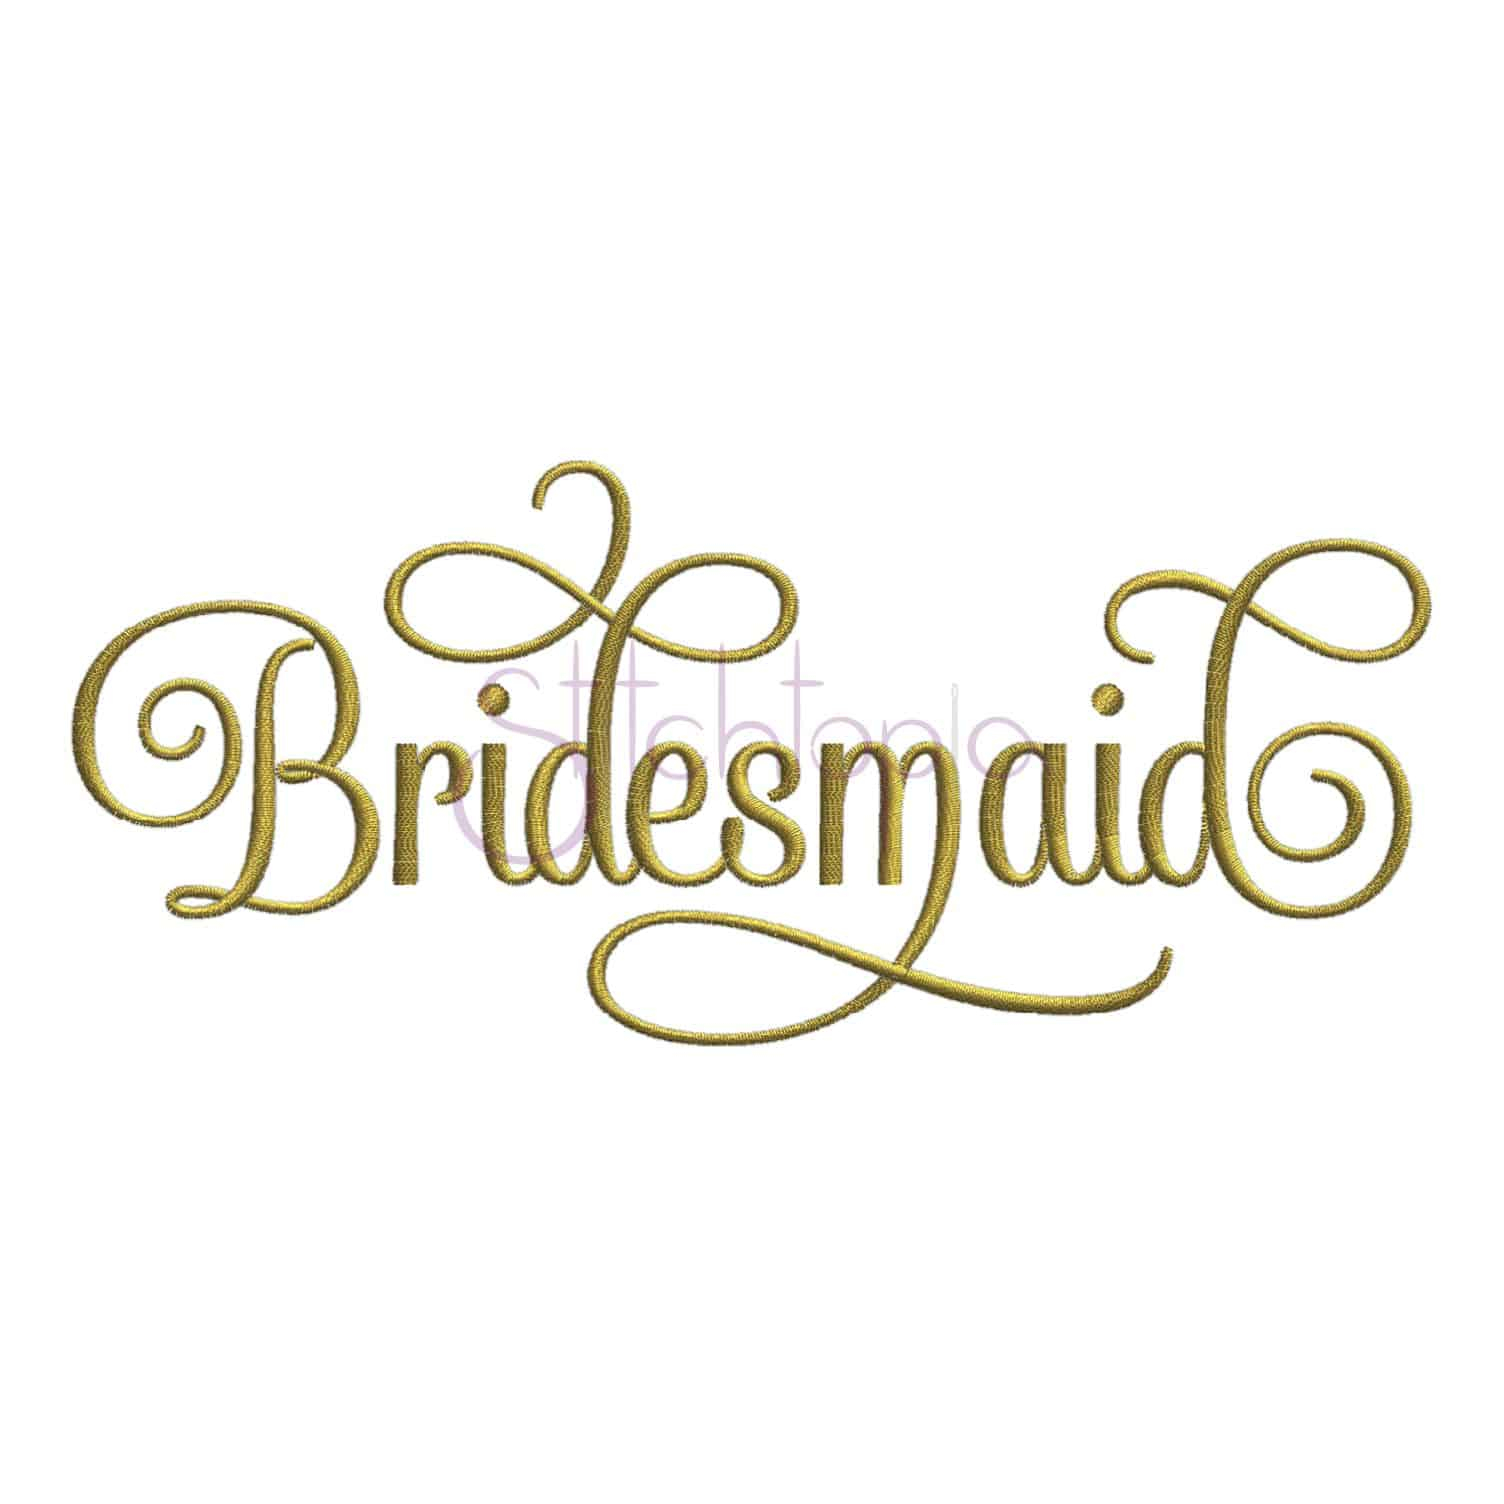 Wedding Embroidery Patterns Bridal Bridesmaid Embroidery Design